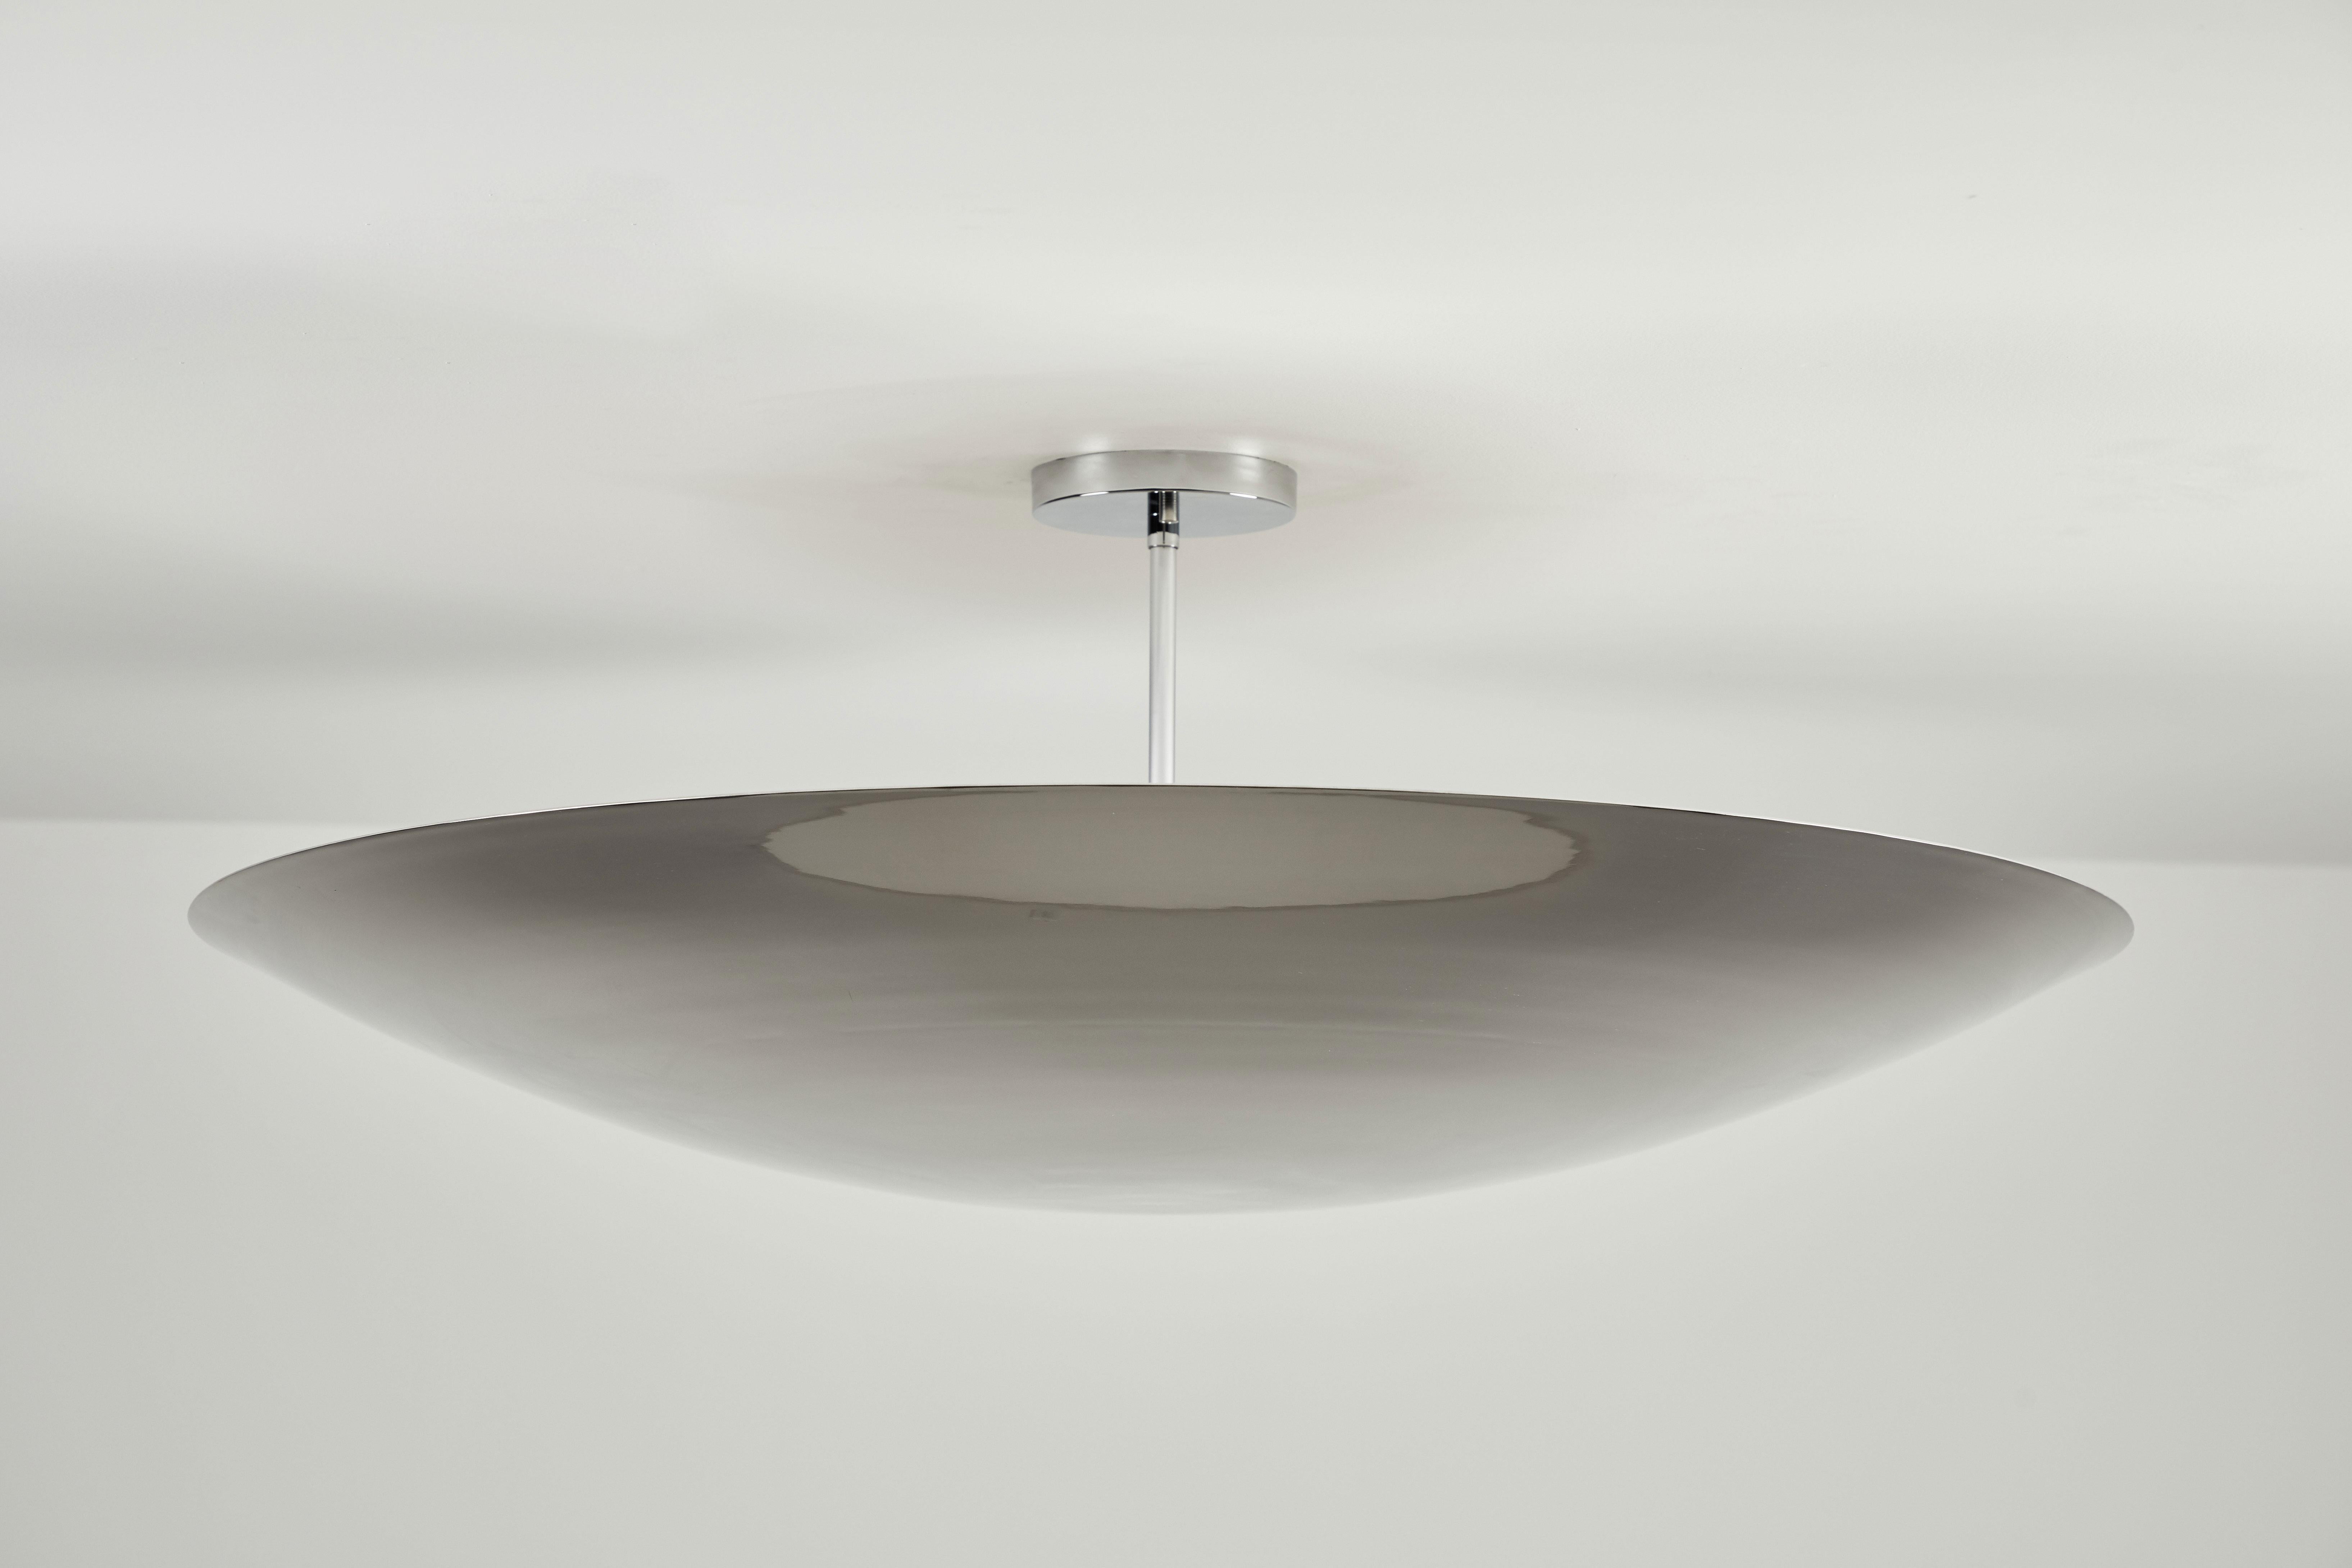 Rewire custom ceiling light. Designed and manufactured in Los angeles by rewire. Chrome plated metal dish with three internal sockets. 8-10 week lead time. Takes three E26 60w maximum bulbs. Chrome-plated brass hardware and canopy.